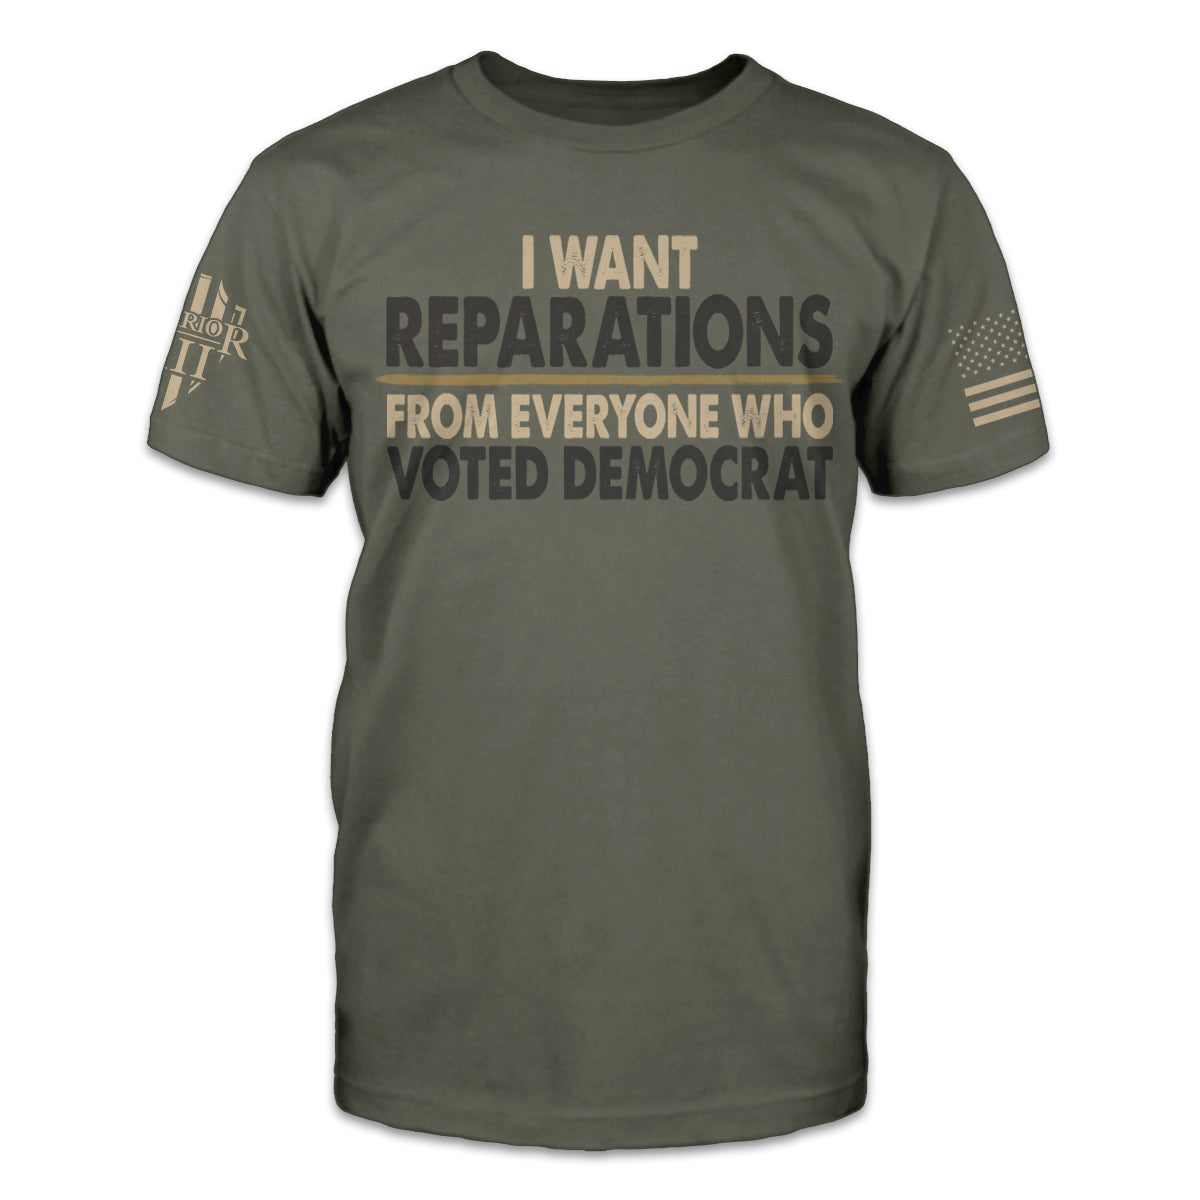 An olive green t-shirt with the words "I want reparations from everyone who voted Democrat" printed on the front.